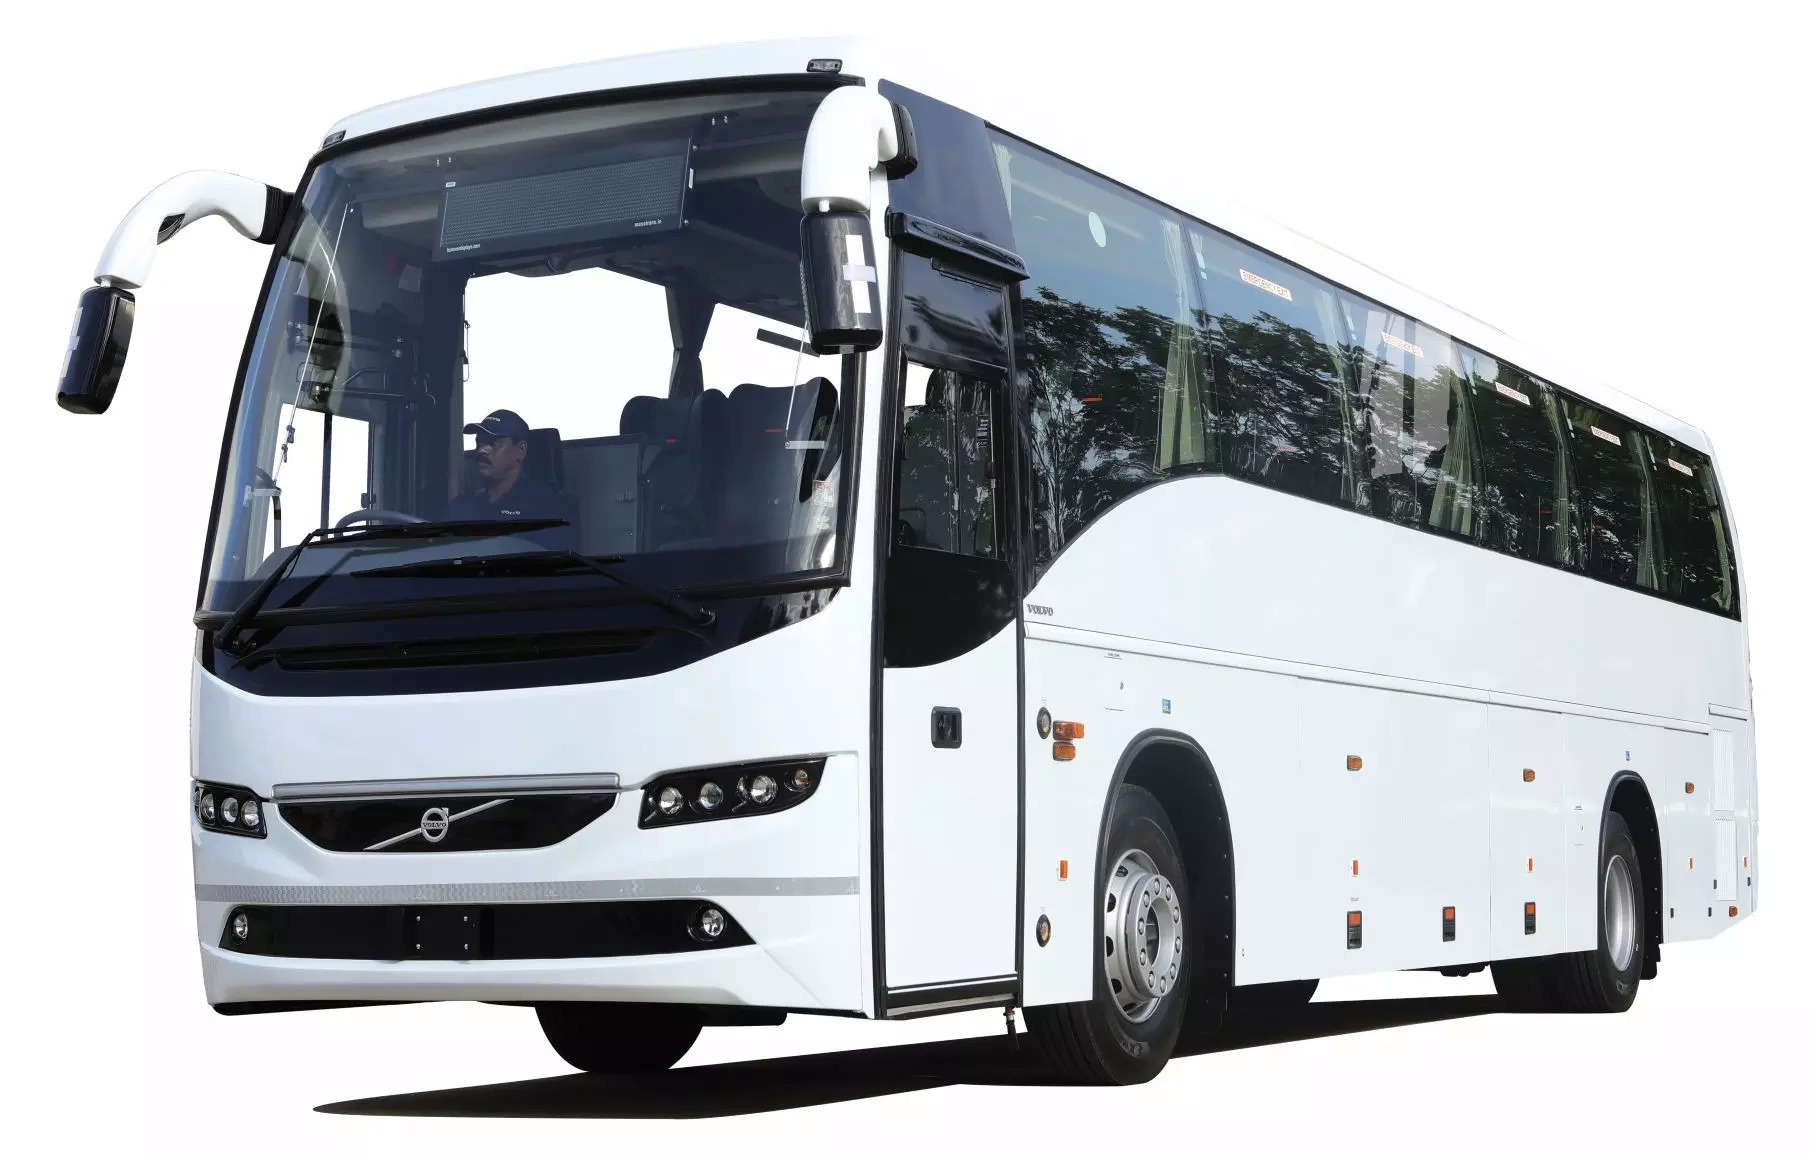 Volvo  4x2 Coach: Volvo Buses launches India's first  4x2 coach,  ET Auto